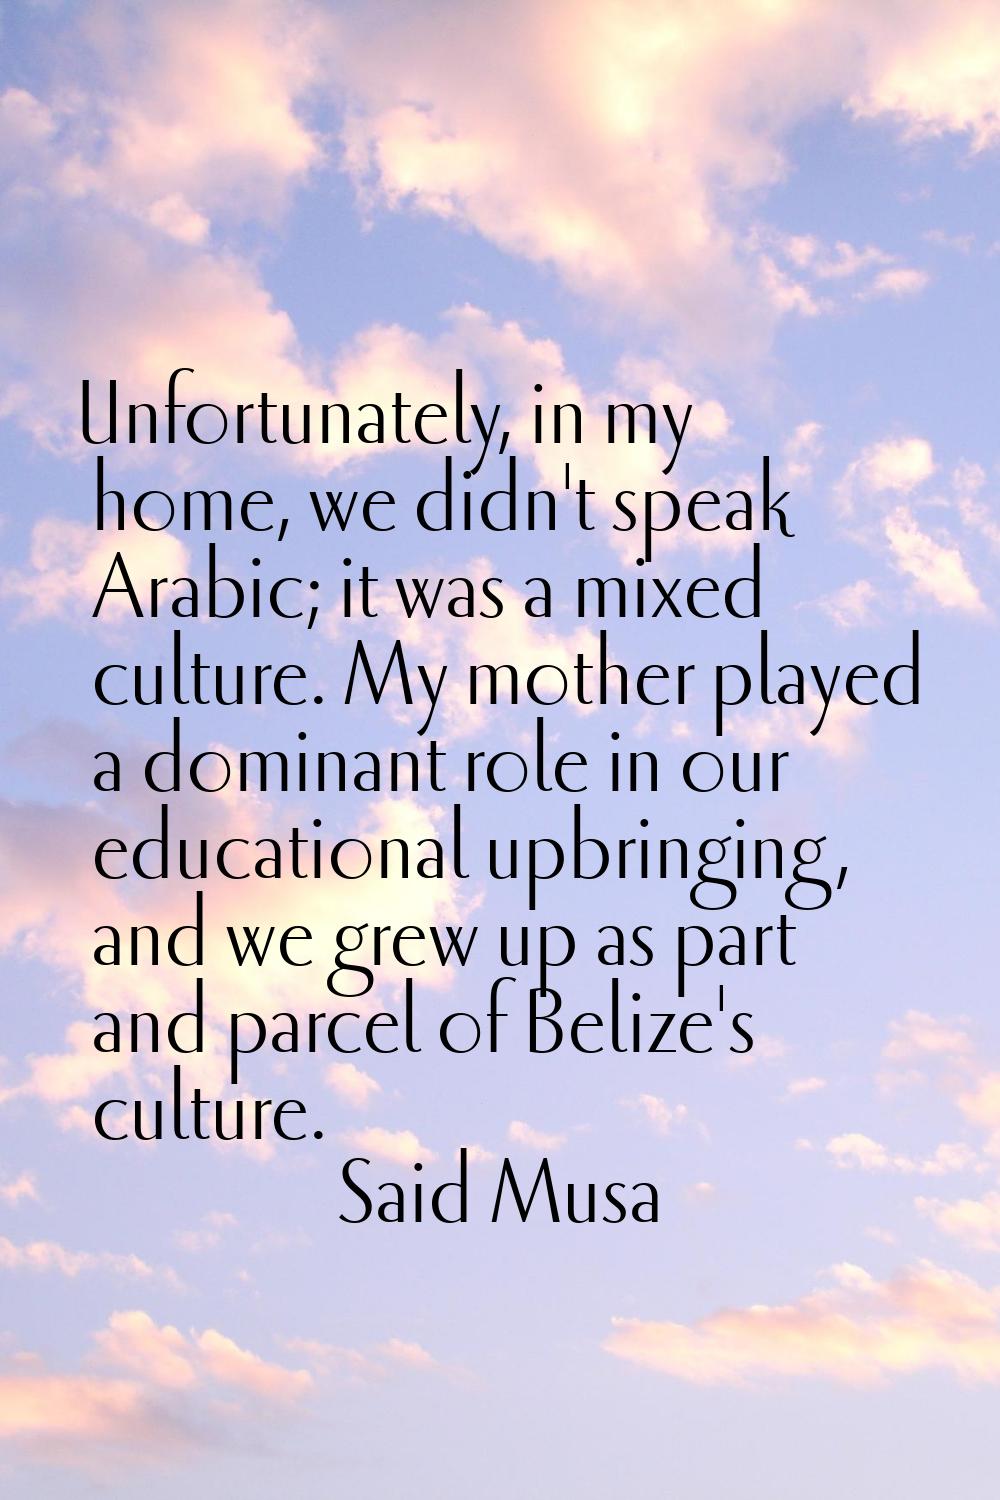 Unfortunately, in my home, we didn't speak Arabic; it was a mixed culture. My mother played a domin